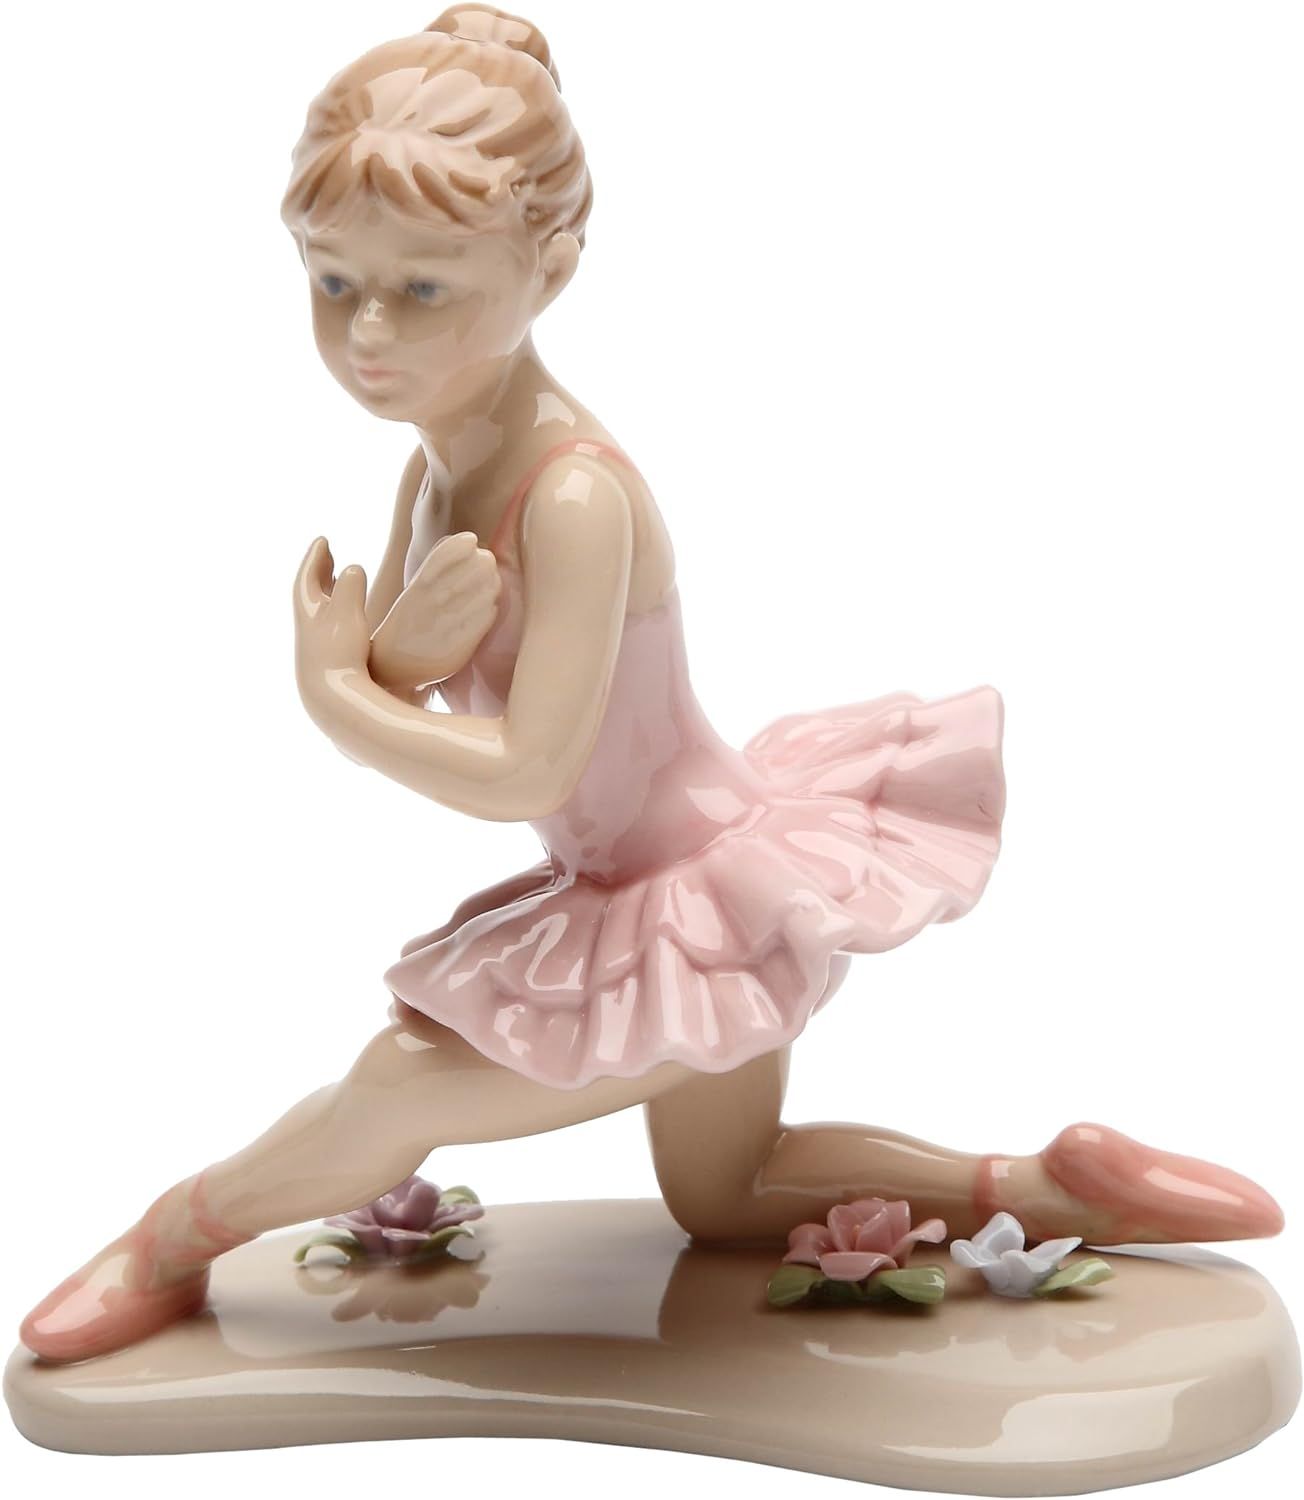 Cosmos Gifts 20863 Ballerina in Pink with Knee Down Ceramic Figurine, 4-1/2-Inch | Amazon (US)